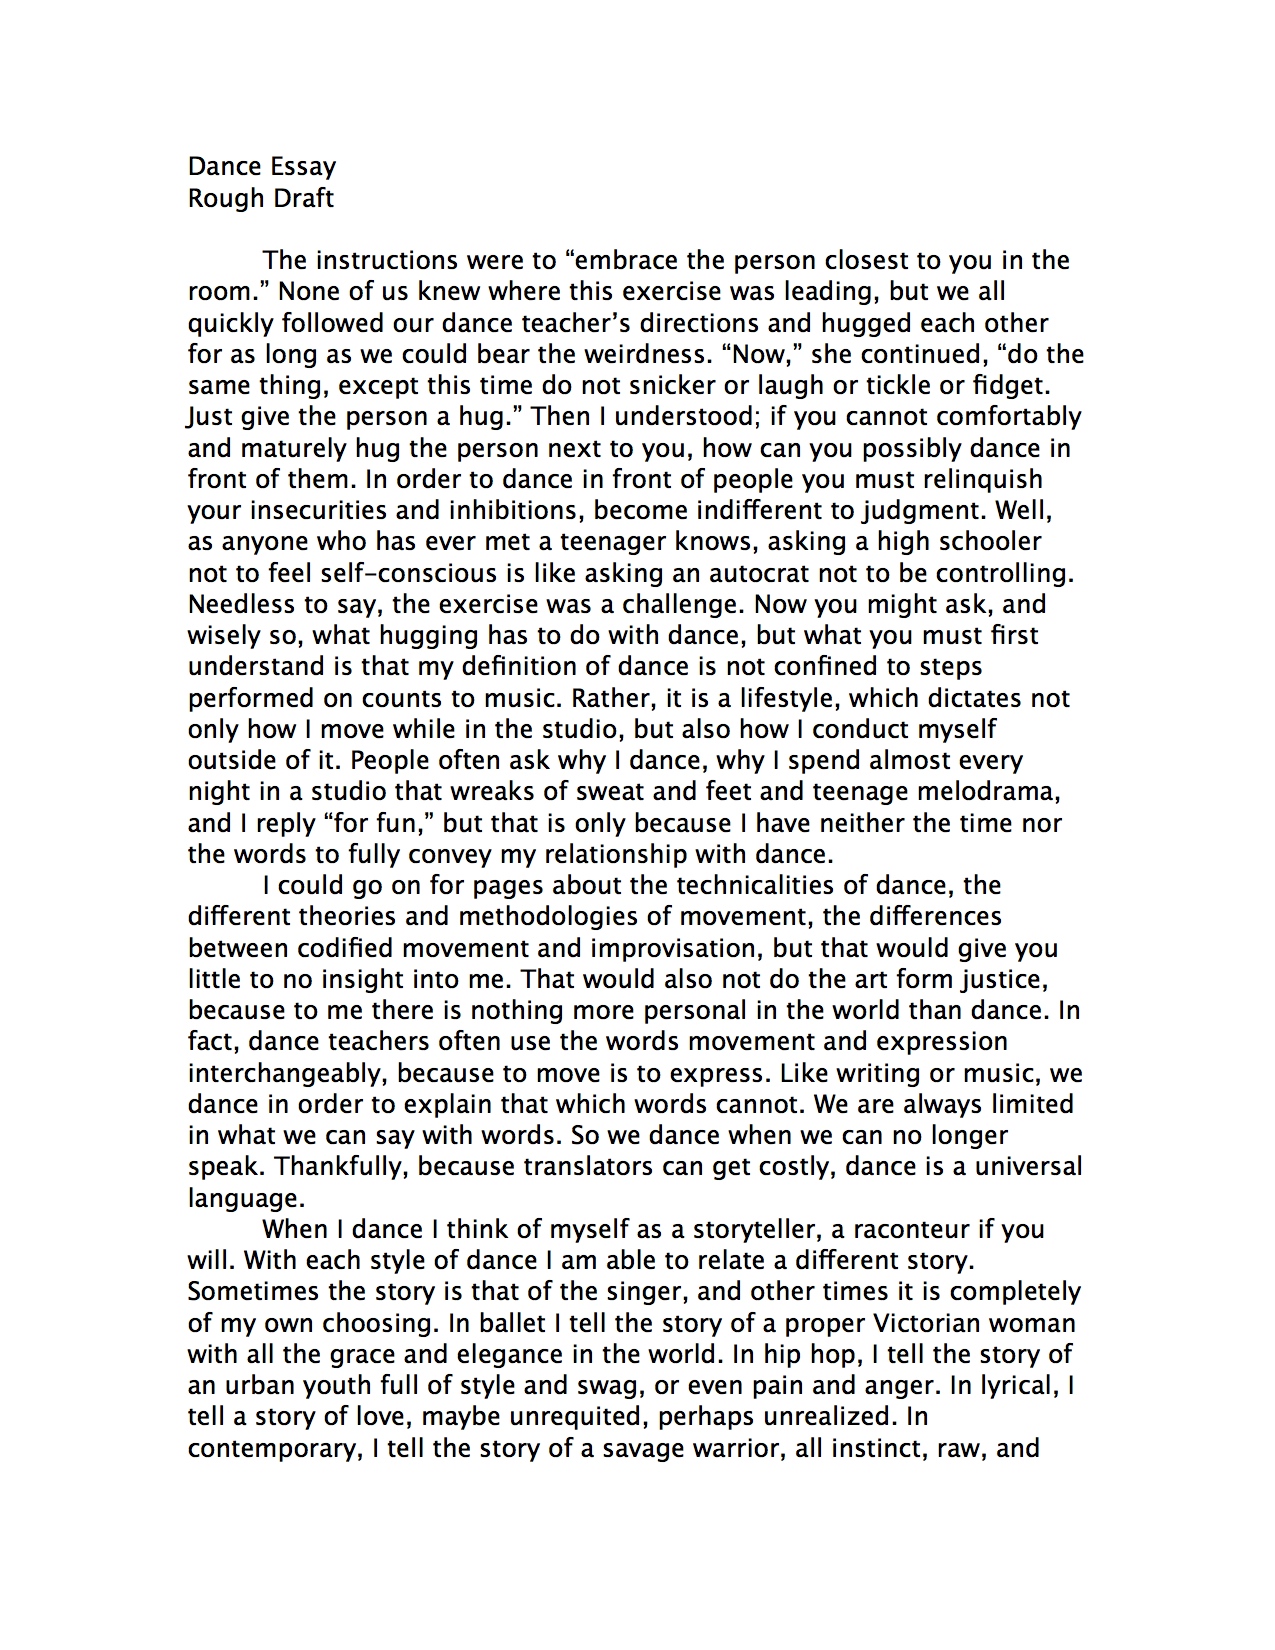 College essay examples 2012 election